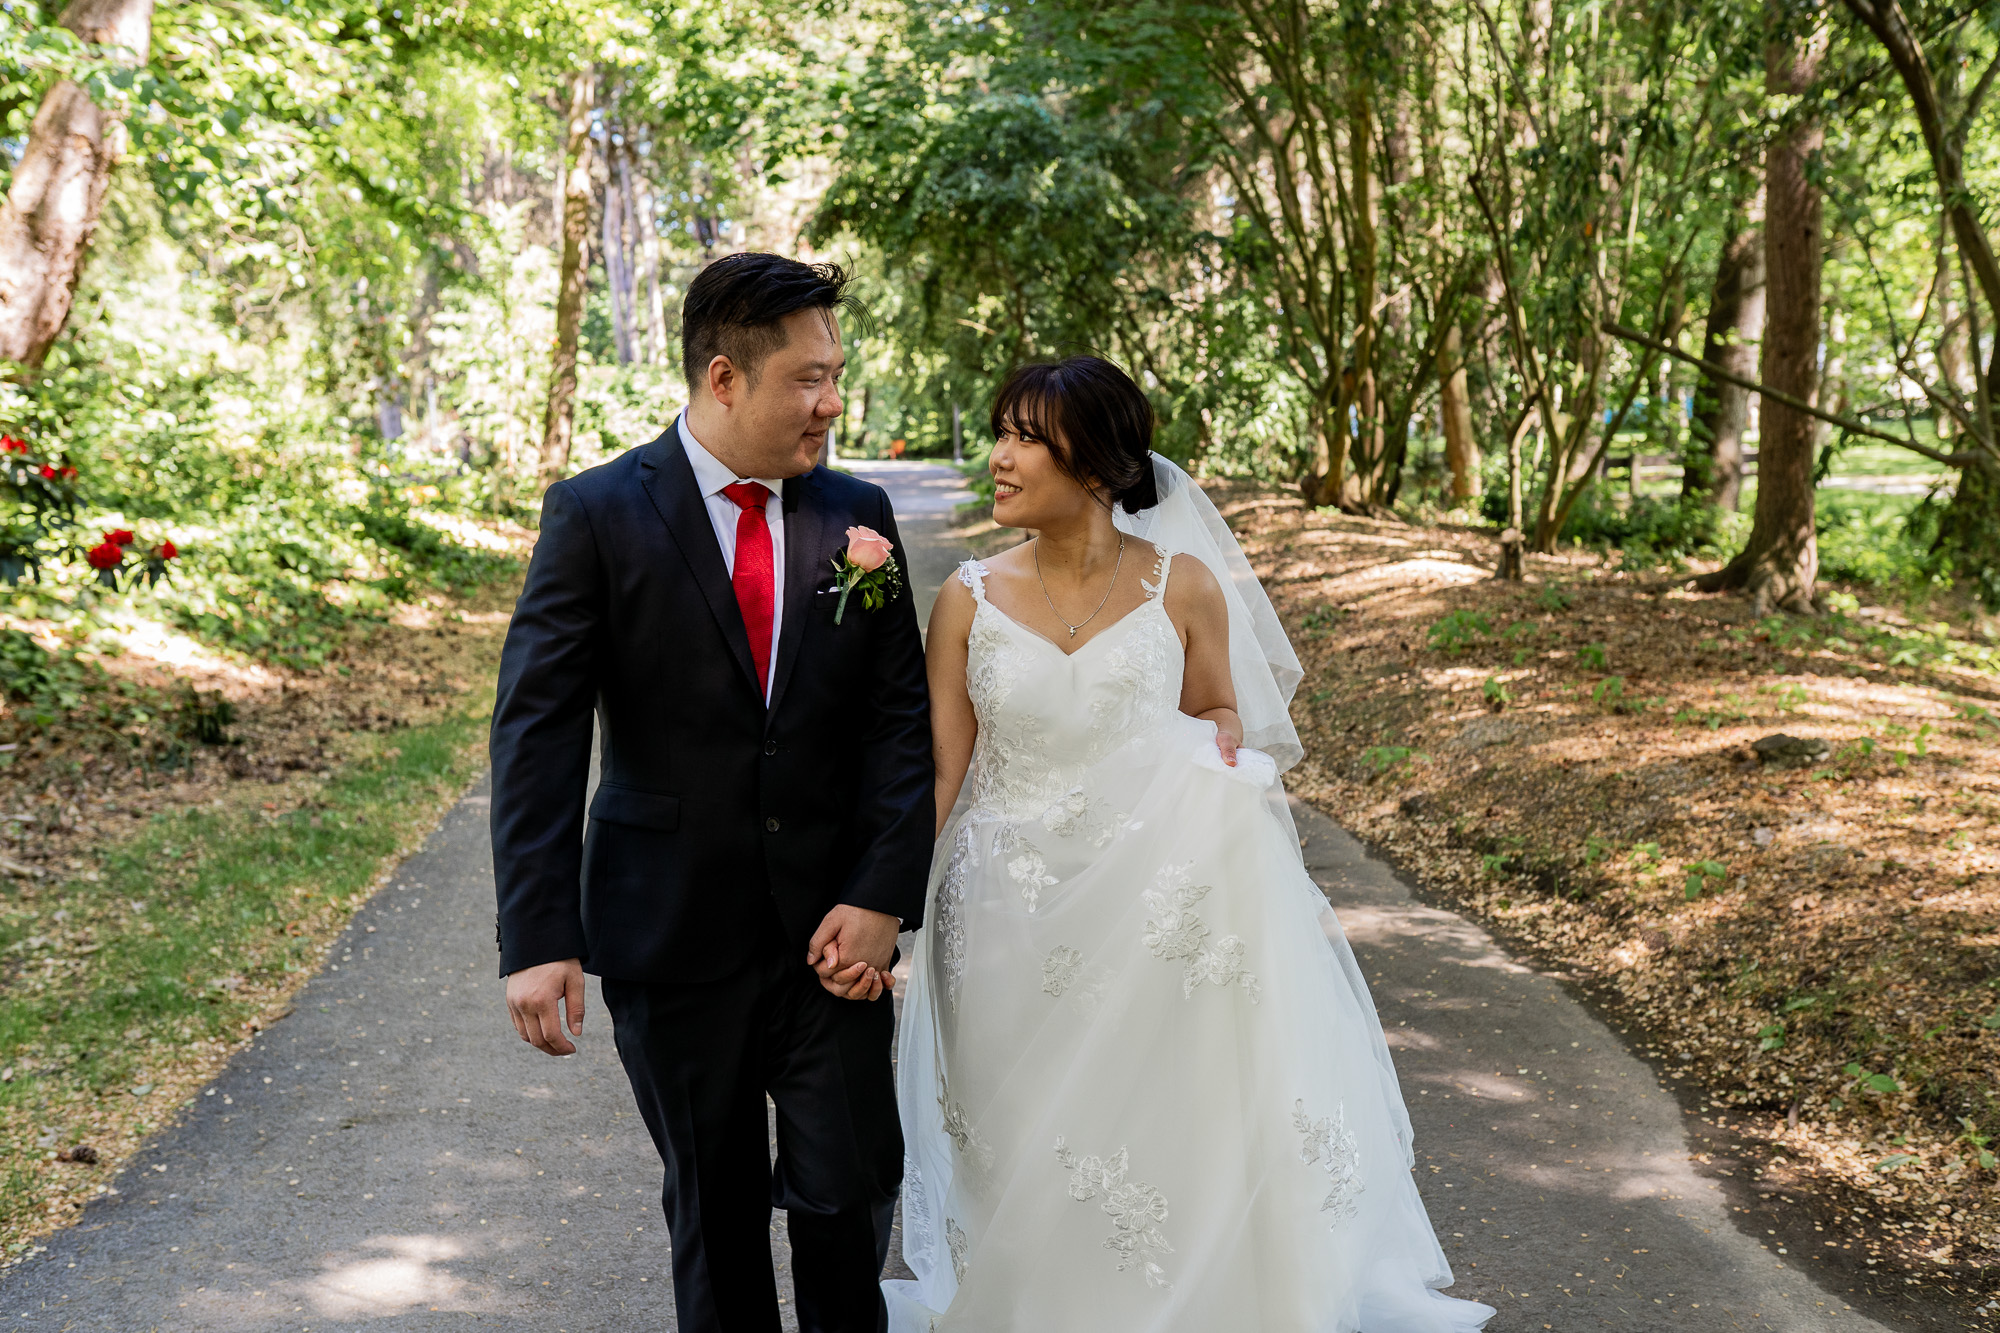 couple walking after their ceremony at Minoru Park